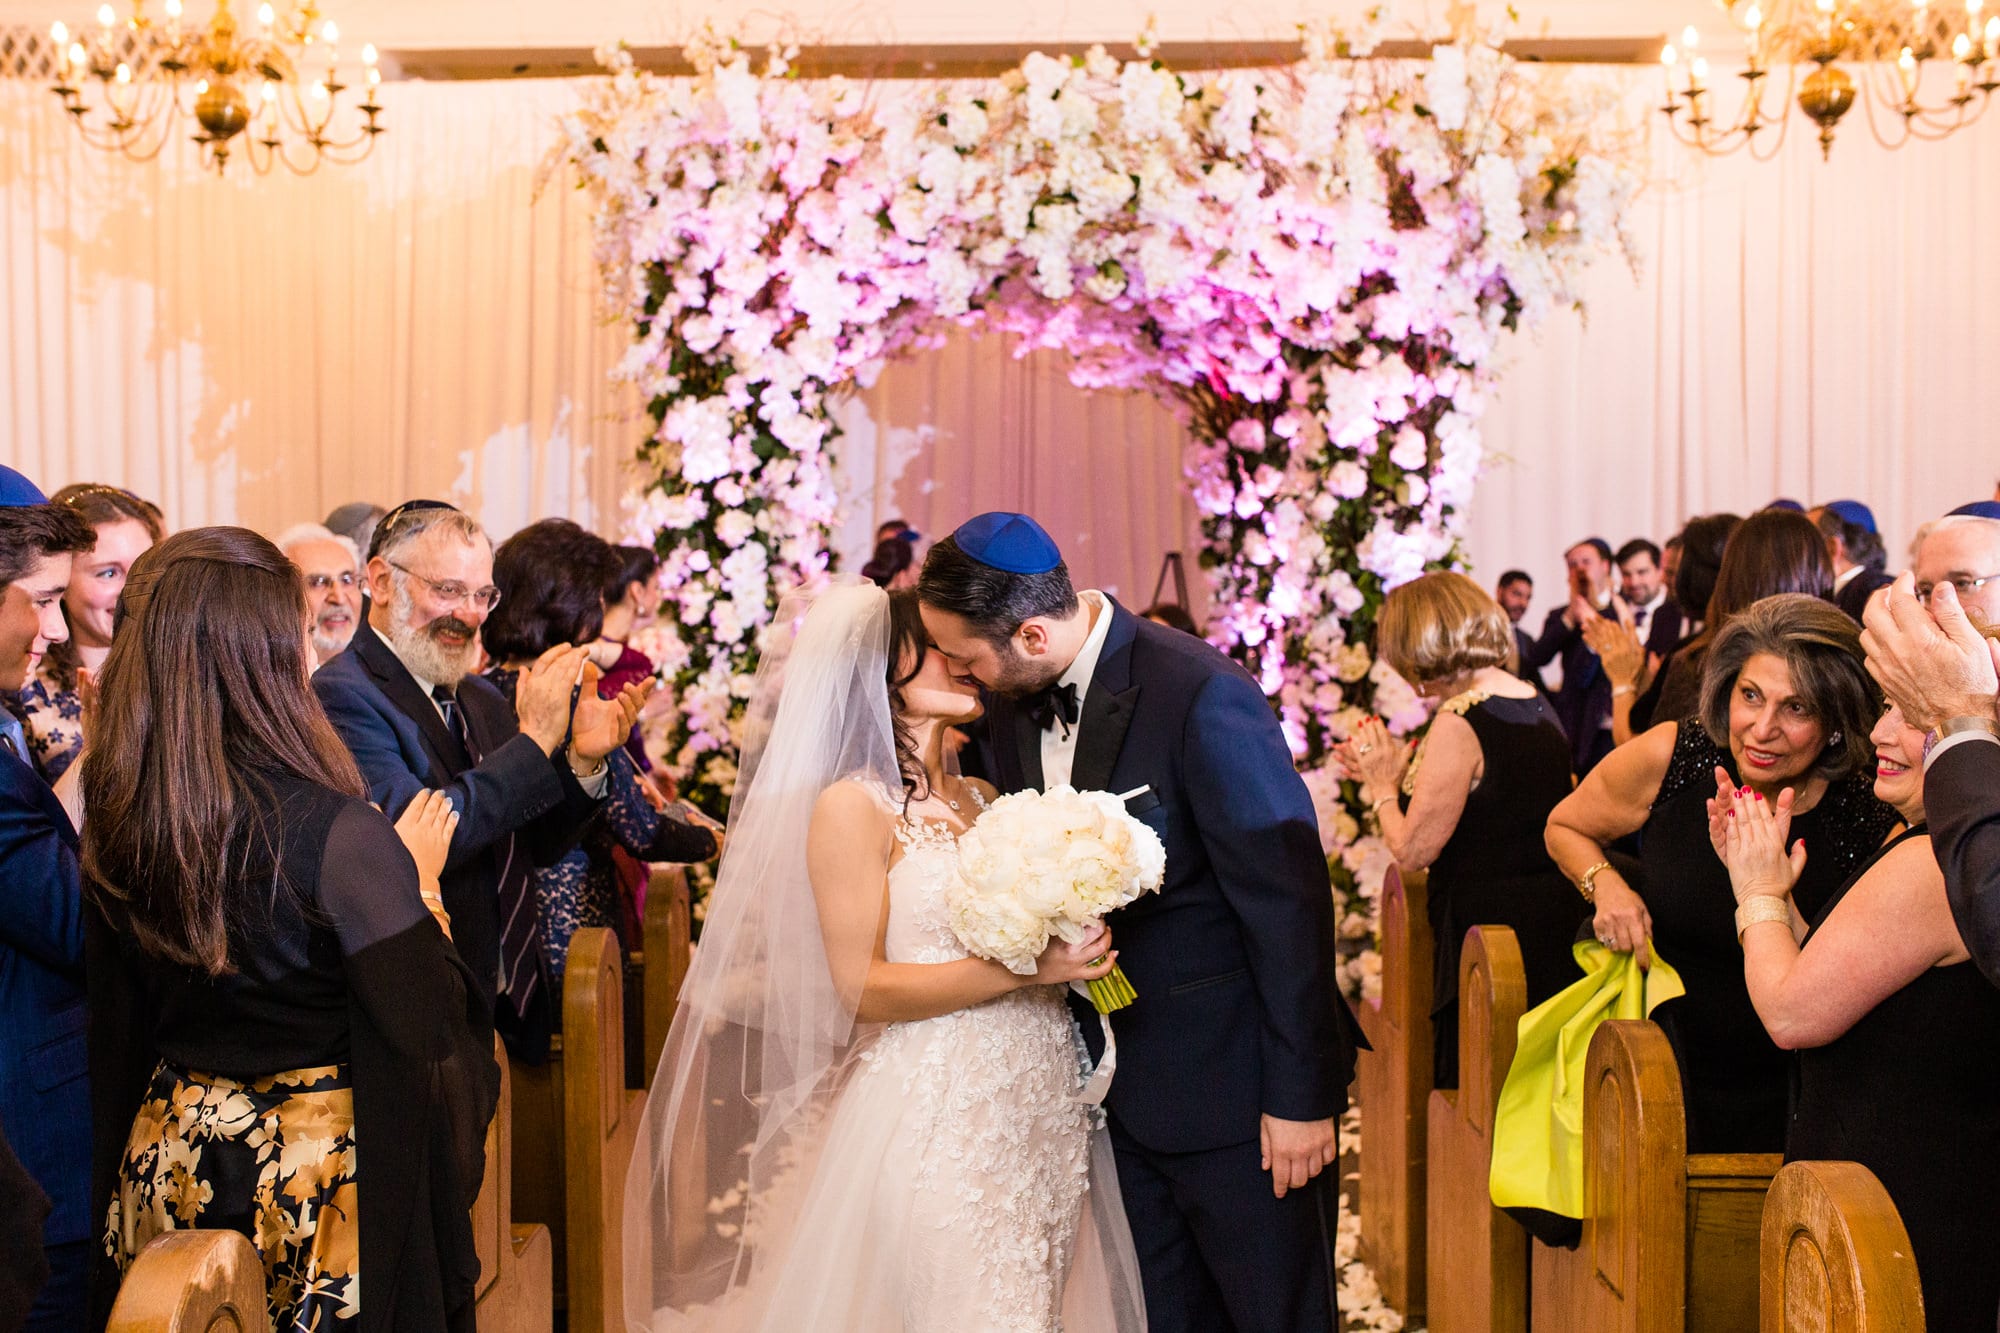 Jewish bride and groom kiss after marriage ceremony in Great Neck, NY.